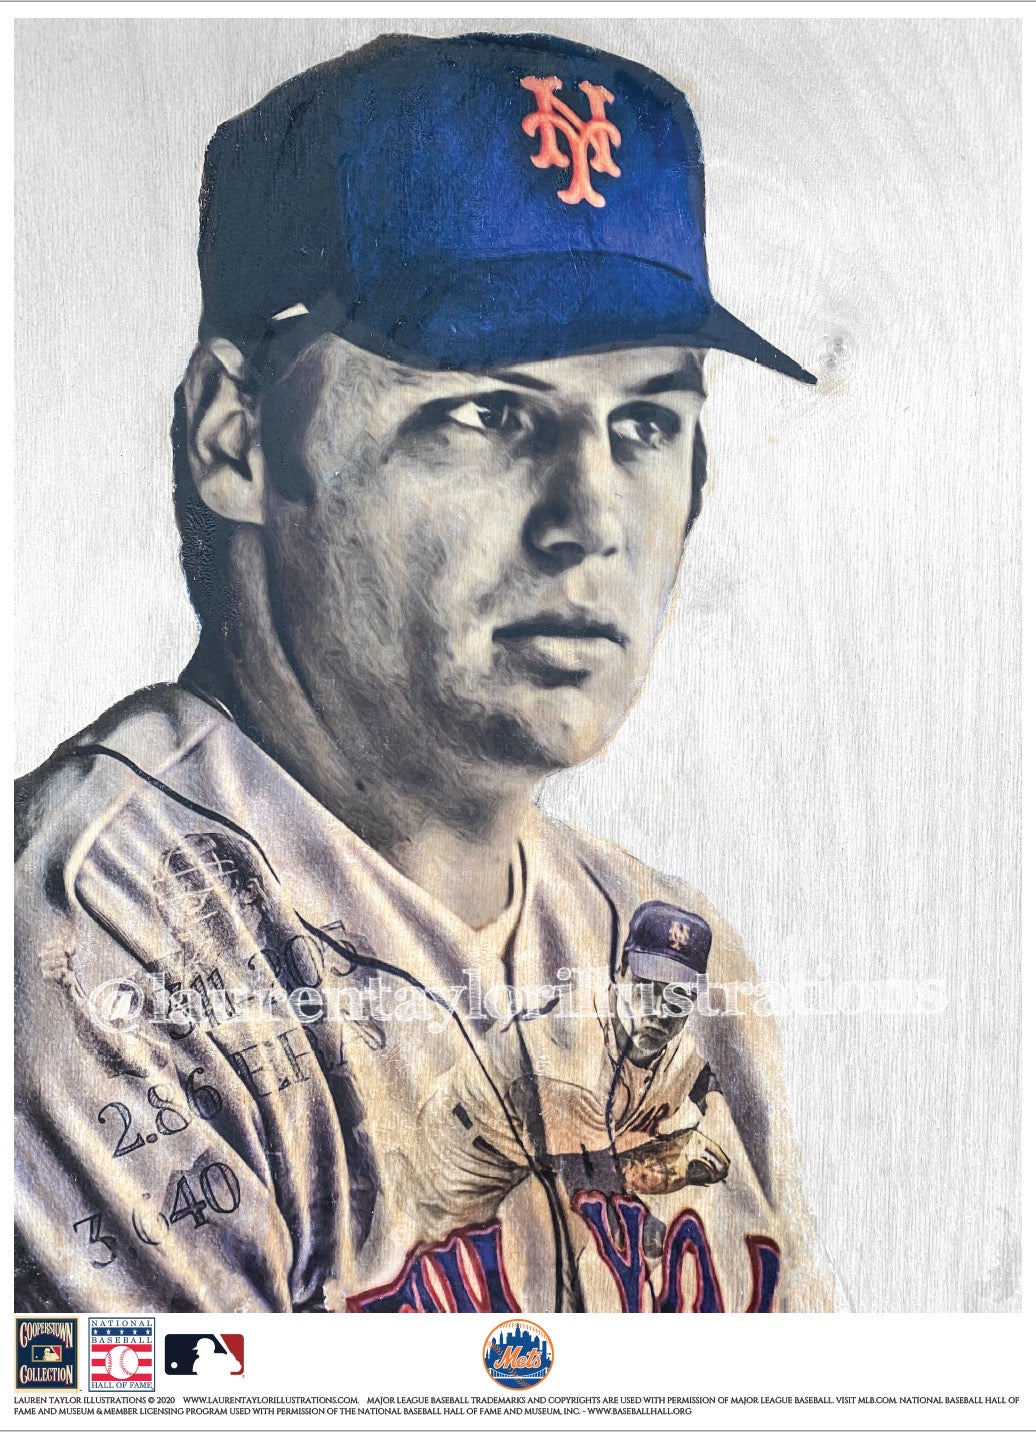 The Franchise (Tom Seaver) New York Mets - Officially Licensed MLB  Cooperstown Collection Print - Limited Release